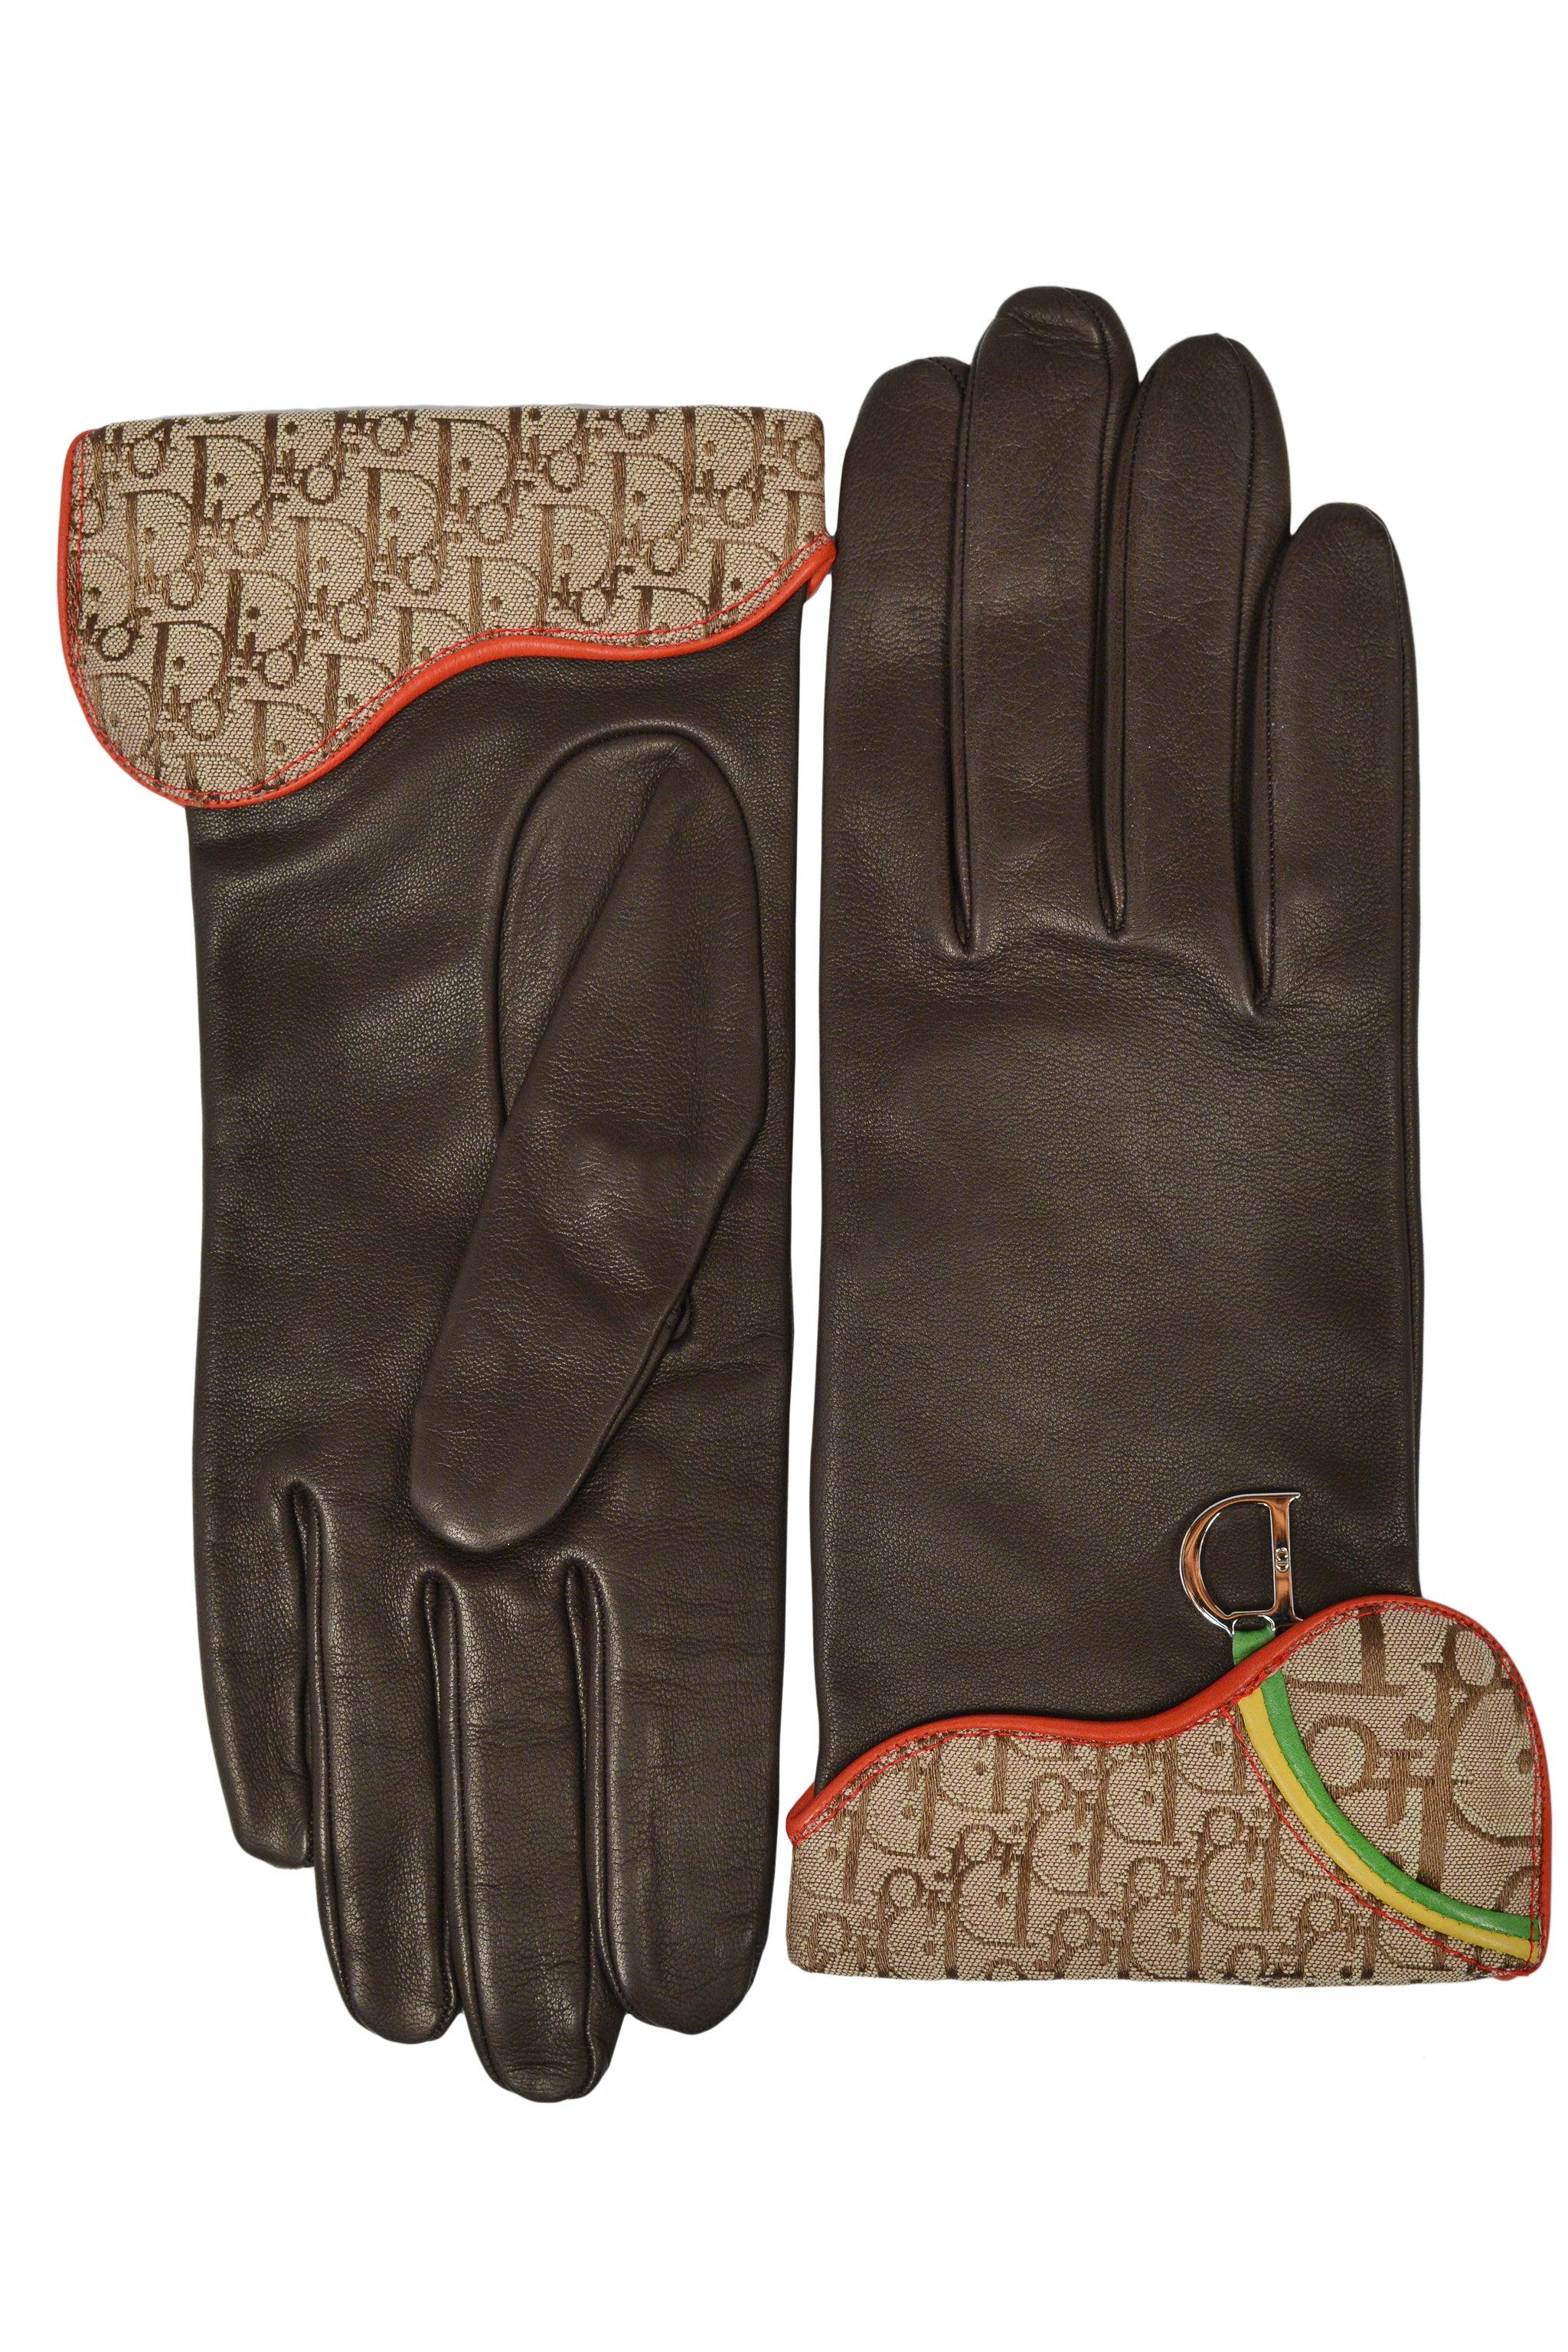 Resurrection Vintage is excited to offer a pair of vintage Christian Dior grown leather gloves with Diorissimo logo fabric, reggae-colored trim, and silver-tone hardware.

Christian Dior Label
Designed By John Galliano
Size US 7.7
Lambskin, Silk